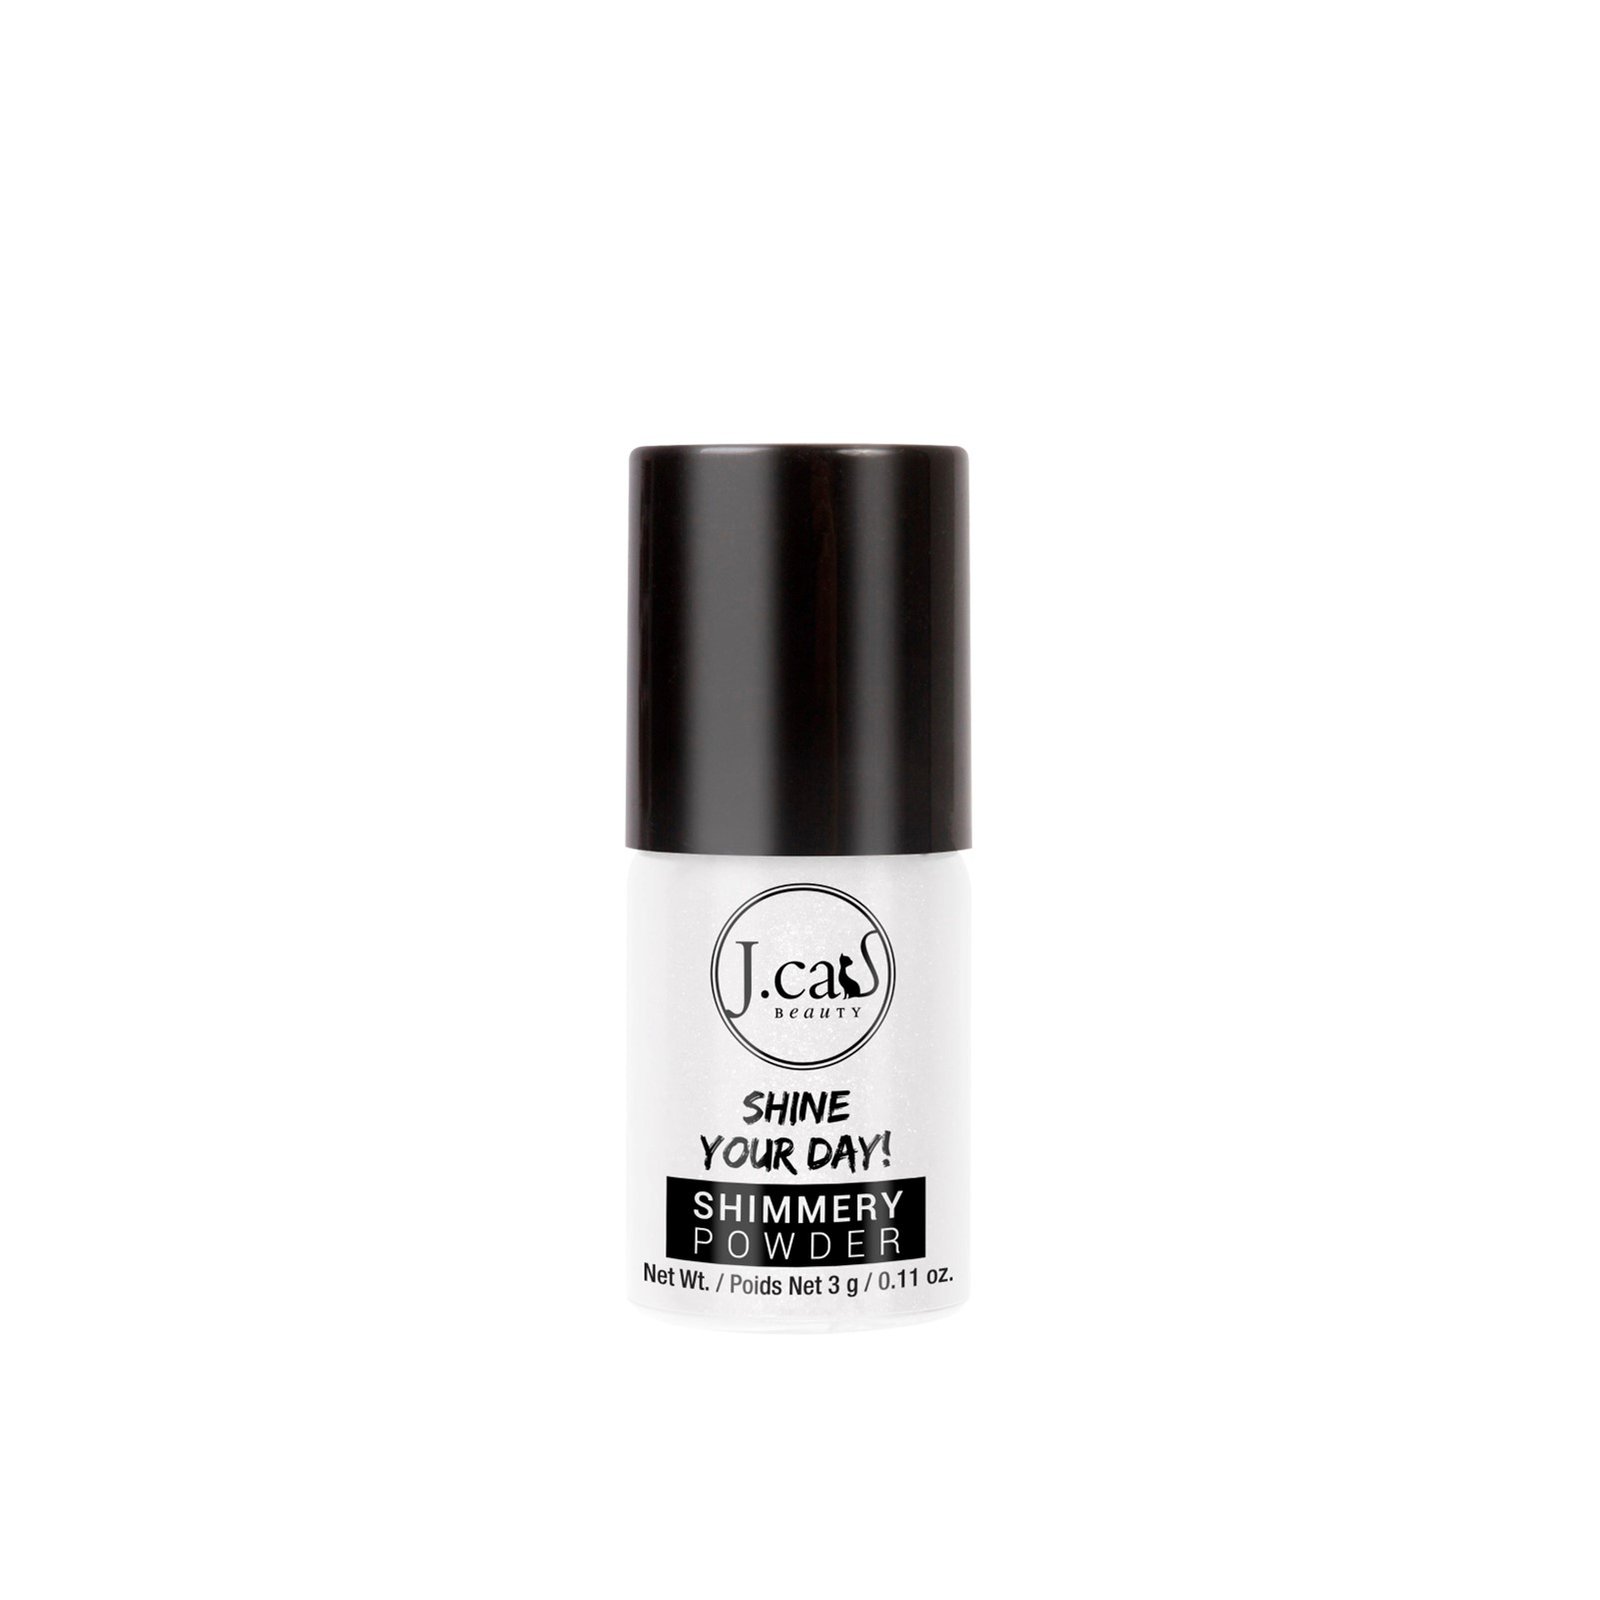 J.Cat Shine Your Day! Shimmery Powder 101 Floral White 3g